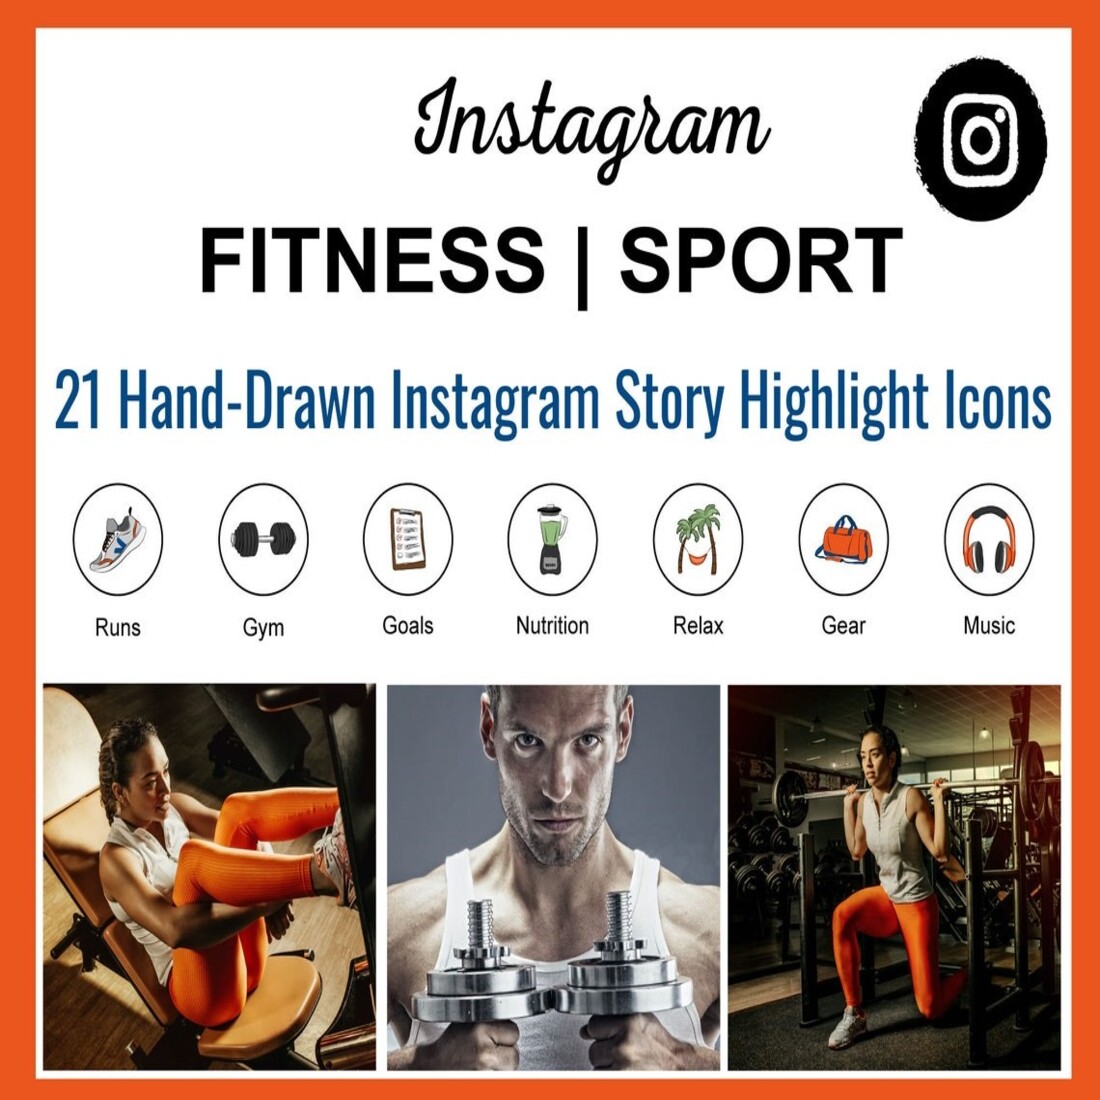 fitness preview Instagram Fitness/Sport Items (21 Hand-Drawn Instagram Story Highlight Icons)